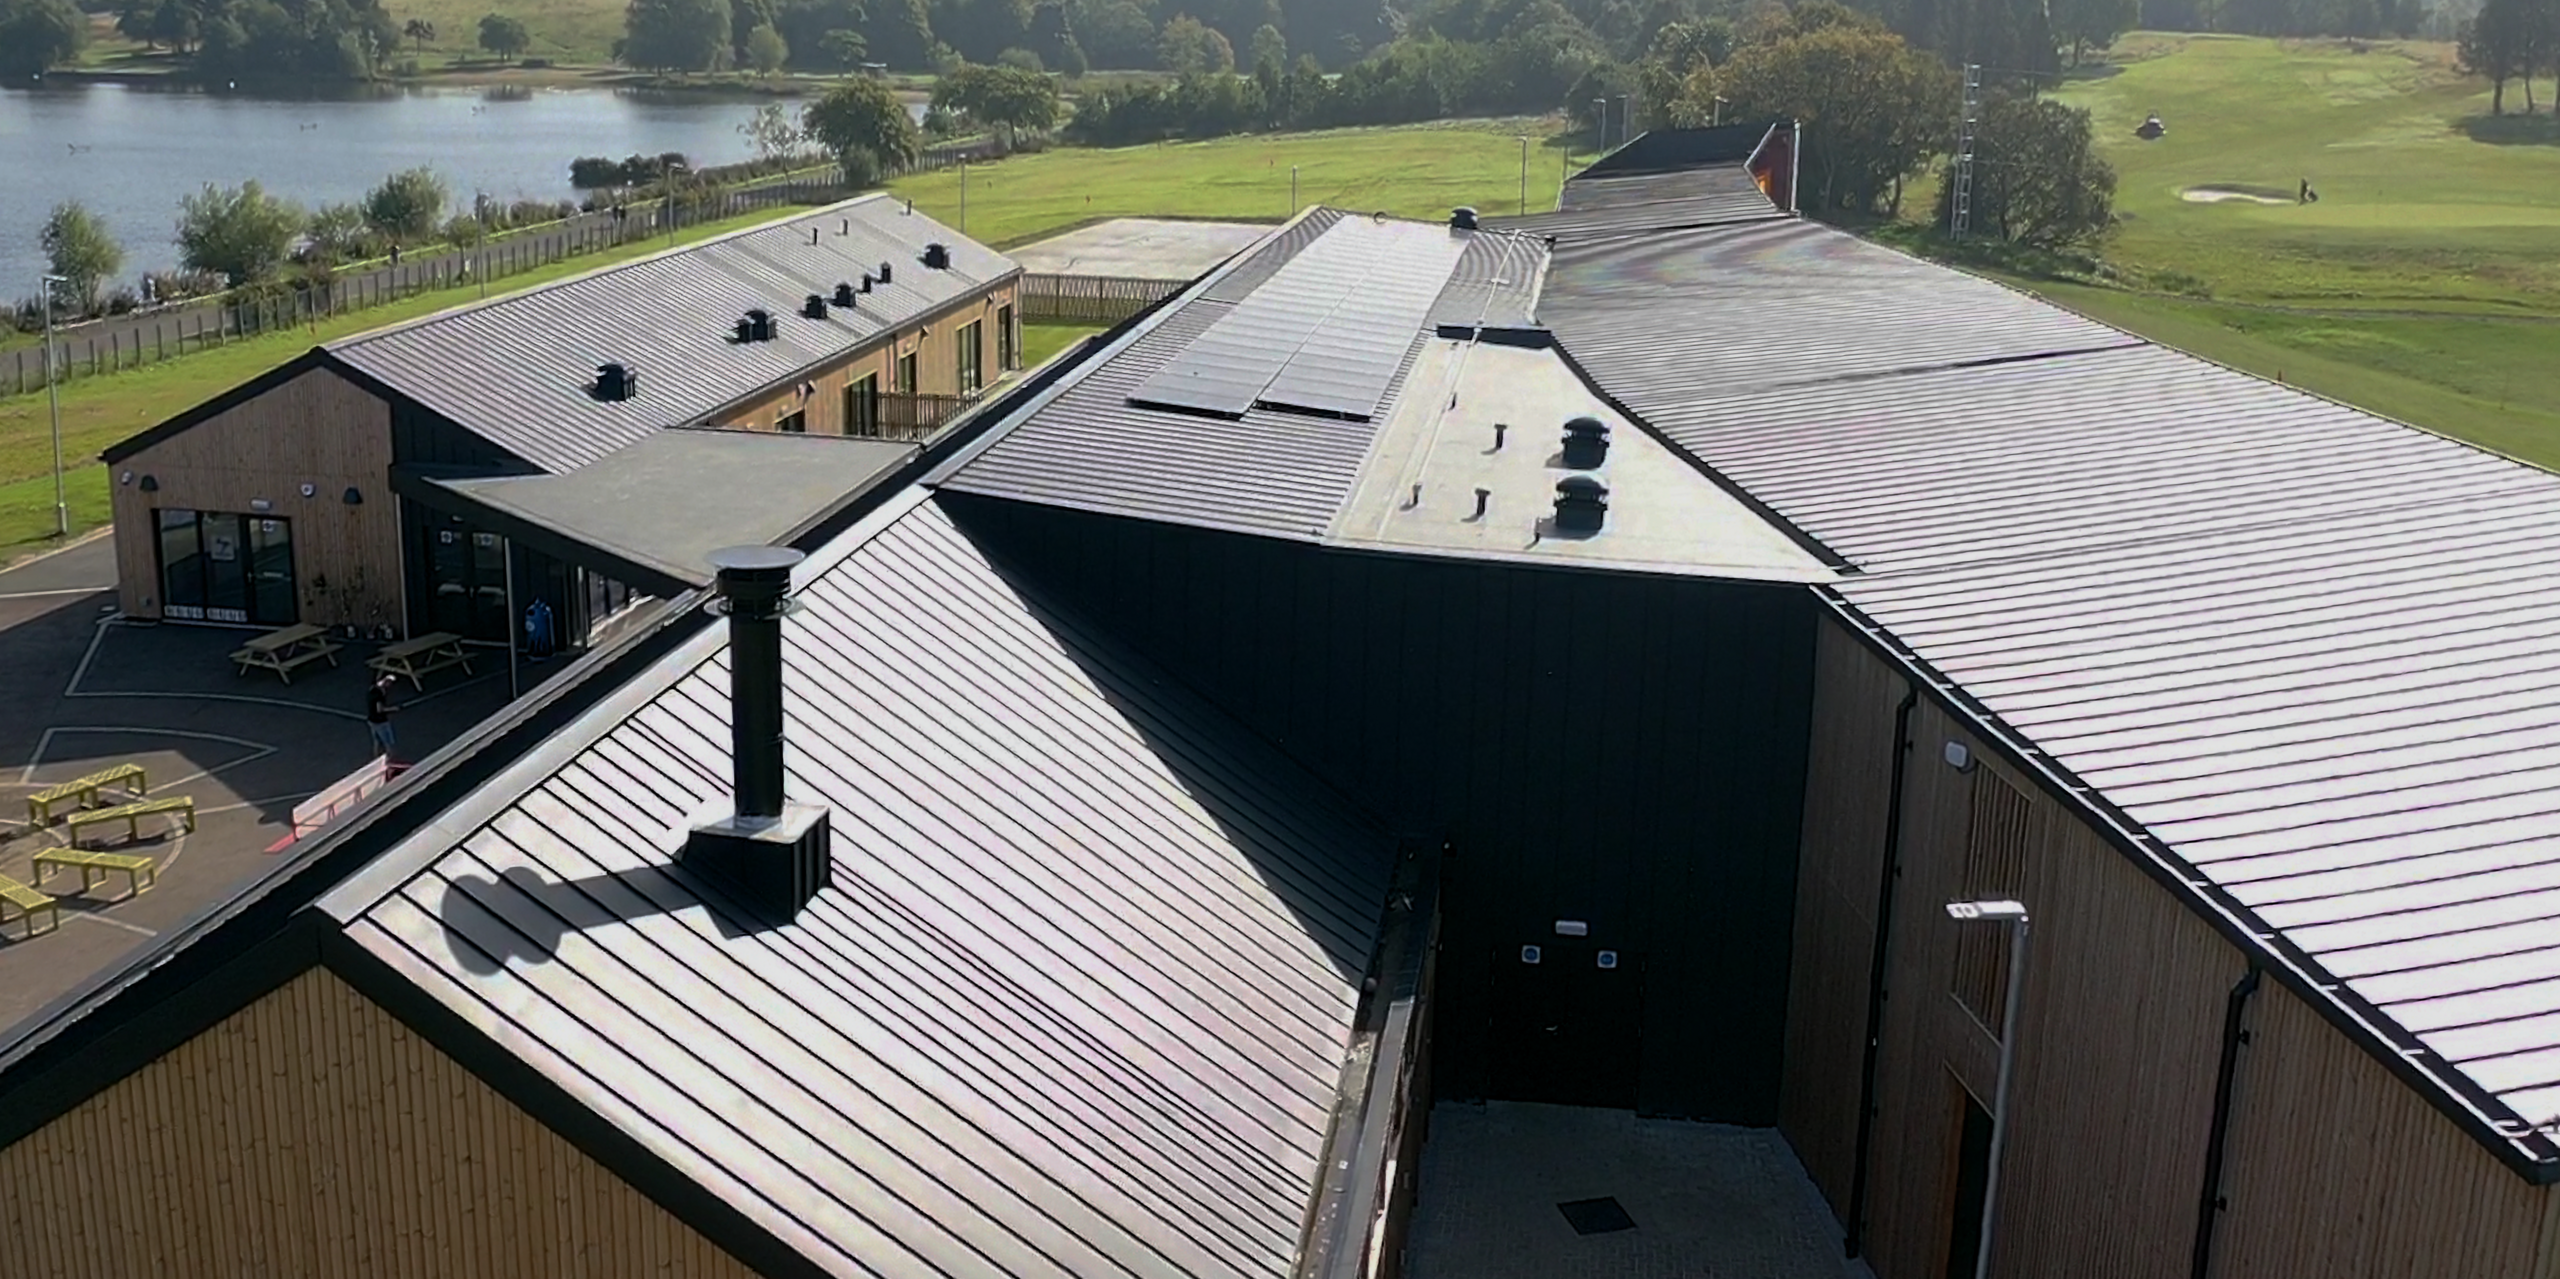 Aerial view of the Golf it! Driving range – golf venue in Glasgow, Scotland, shows the precisely installed PREFALZ roof system in P.10 black. The extensive facility, with a roof area of around 2,000 square metres, reflects the high quality of PREFA aluminium products. The roof surface blends harmoniously into the idyllic, green landscape with the neighbouring lake, emphasising the importance of functionality and natural beauty. The PREFA gutters round off the elegant appearance and guarantee durability and reliability in all weathers.